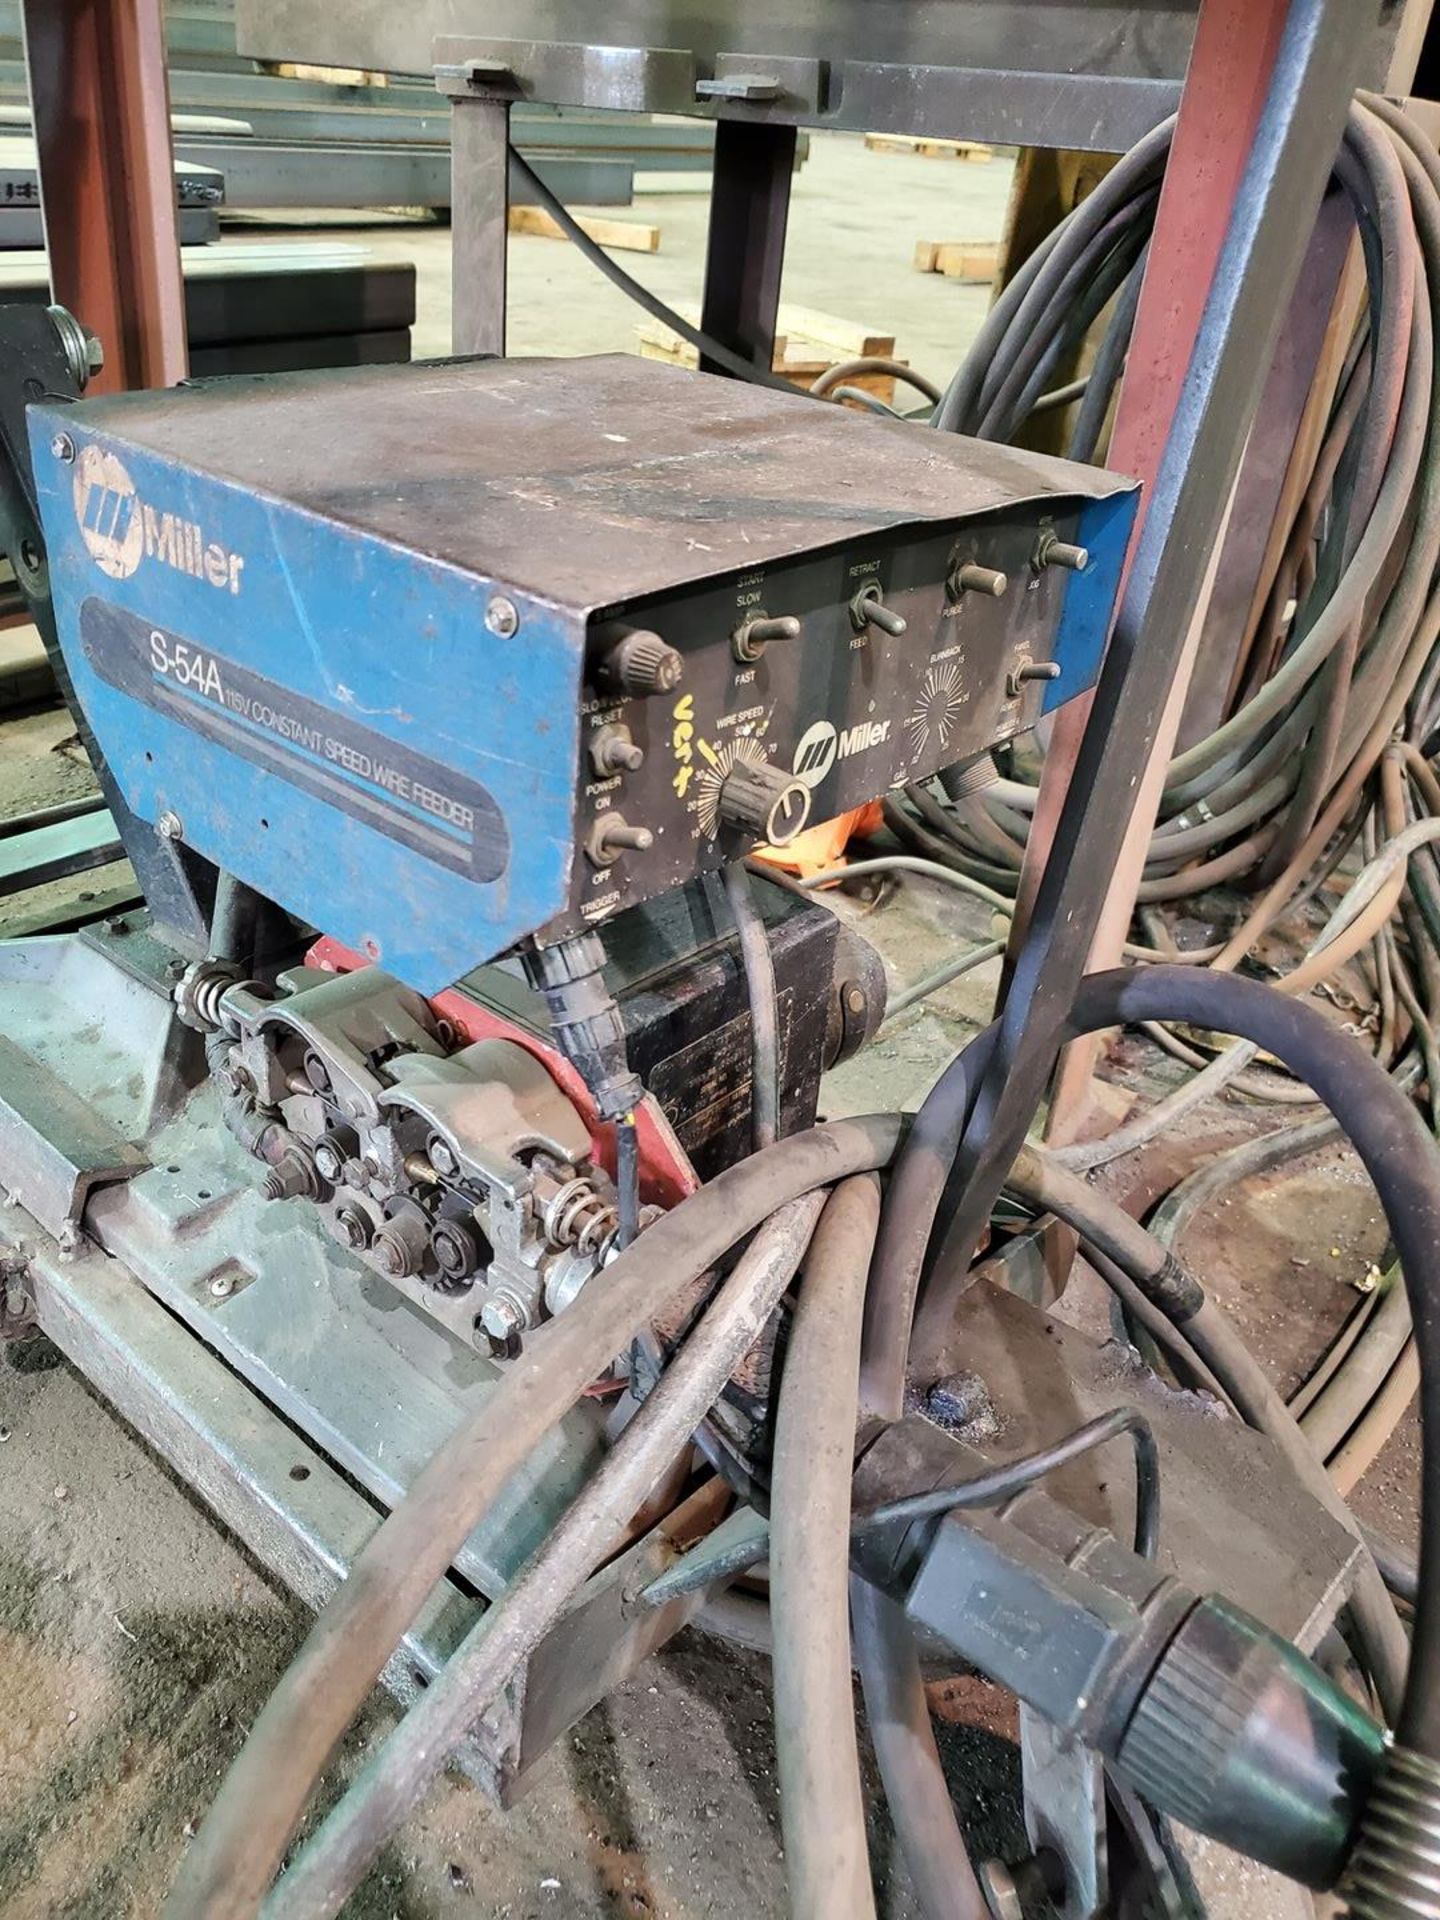 Miller A-CP-500-E Arc Welder 230/460V, 70/35A,3PH, 50/60HZ; W/ S-54A Wire Feeder - Image 7 of 9